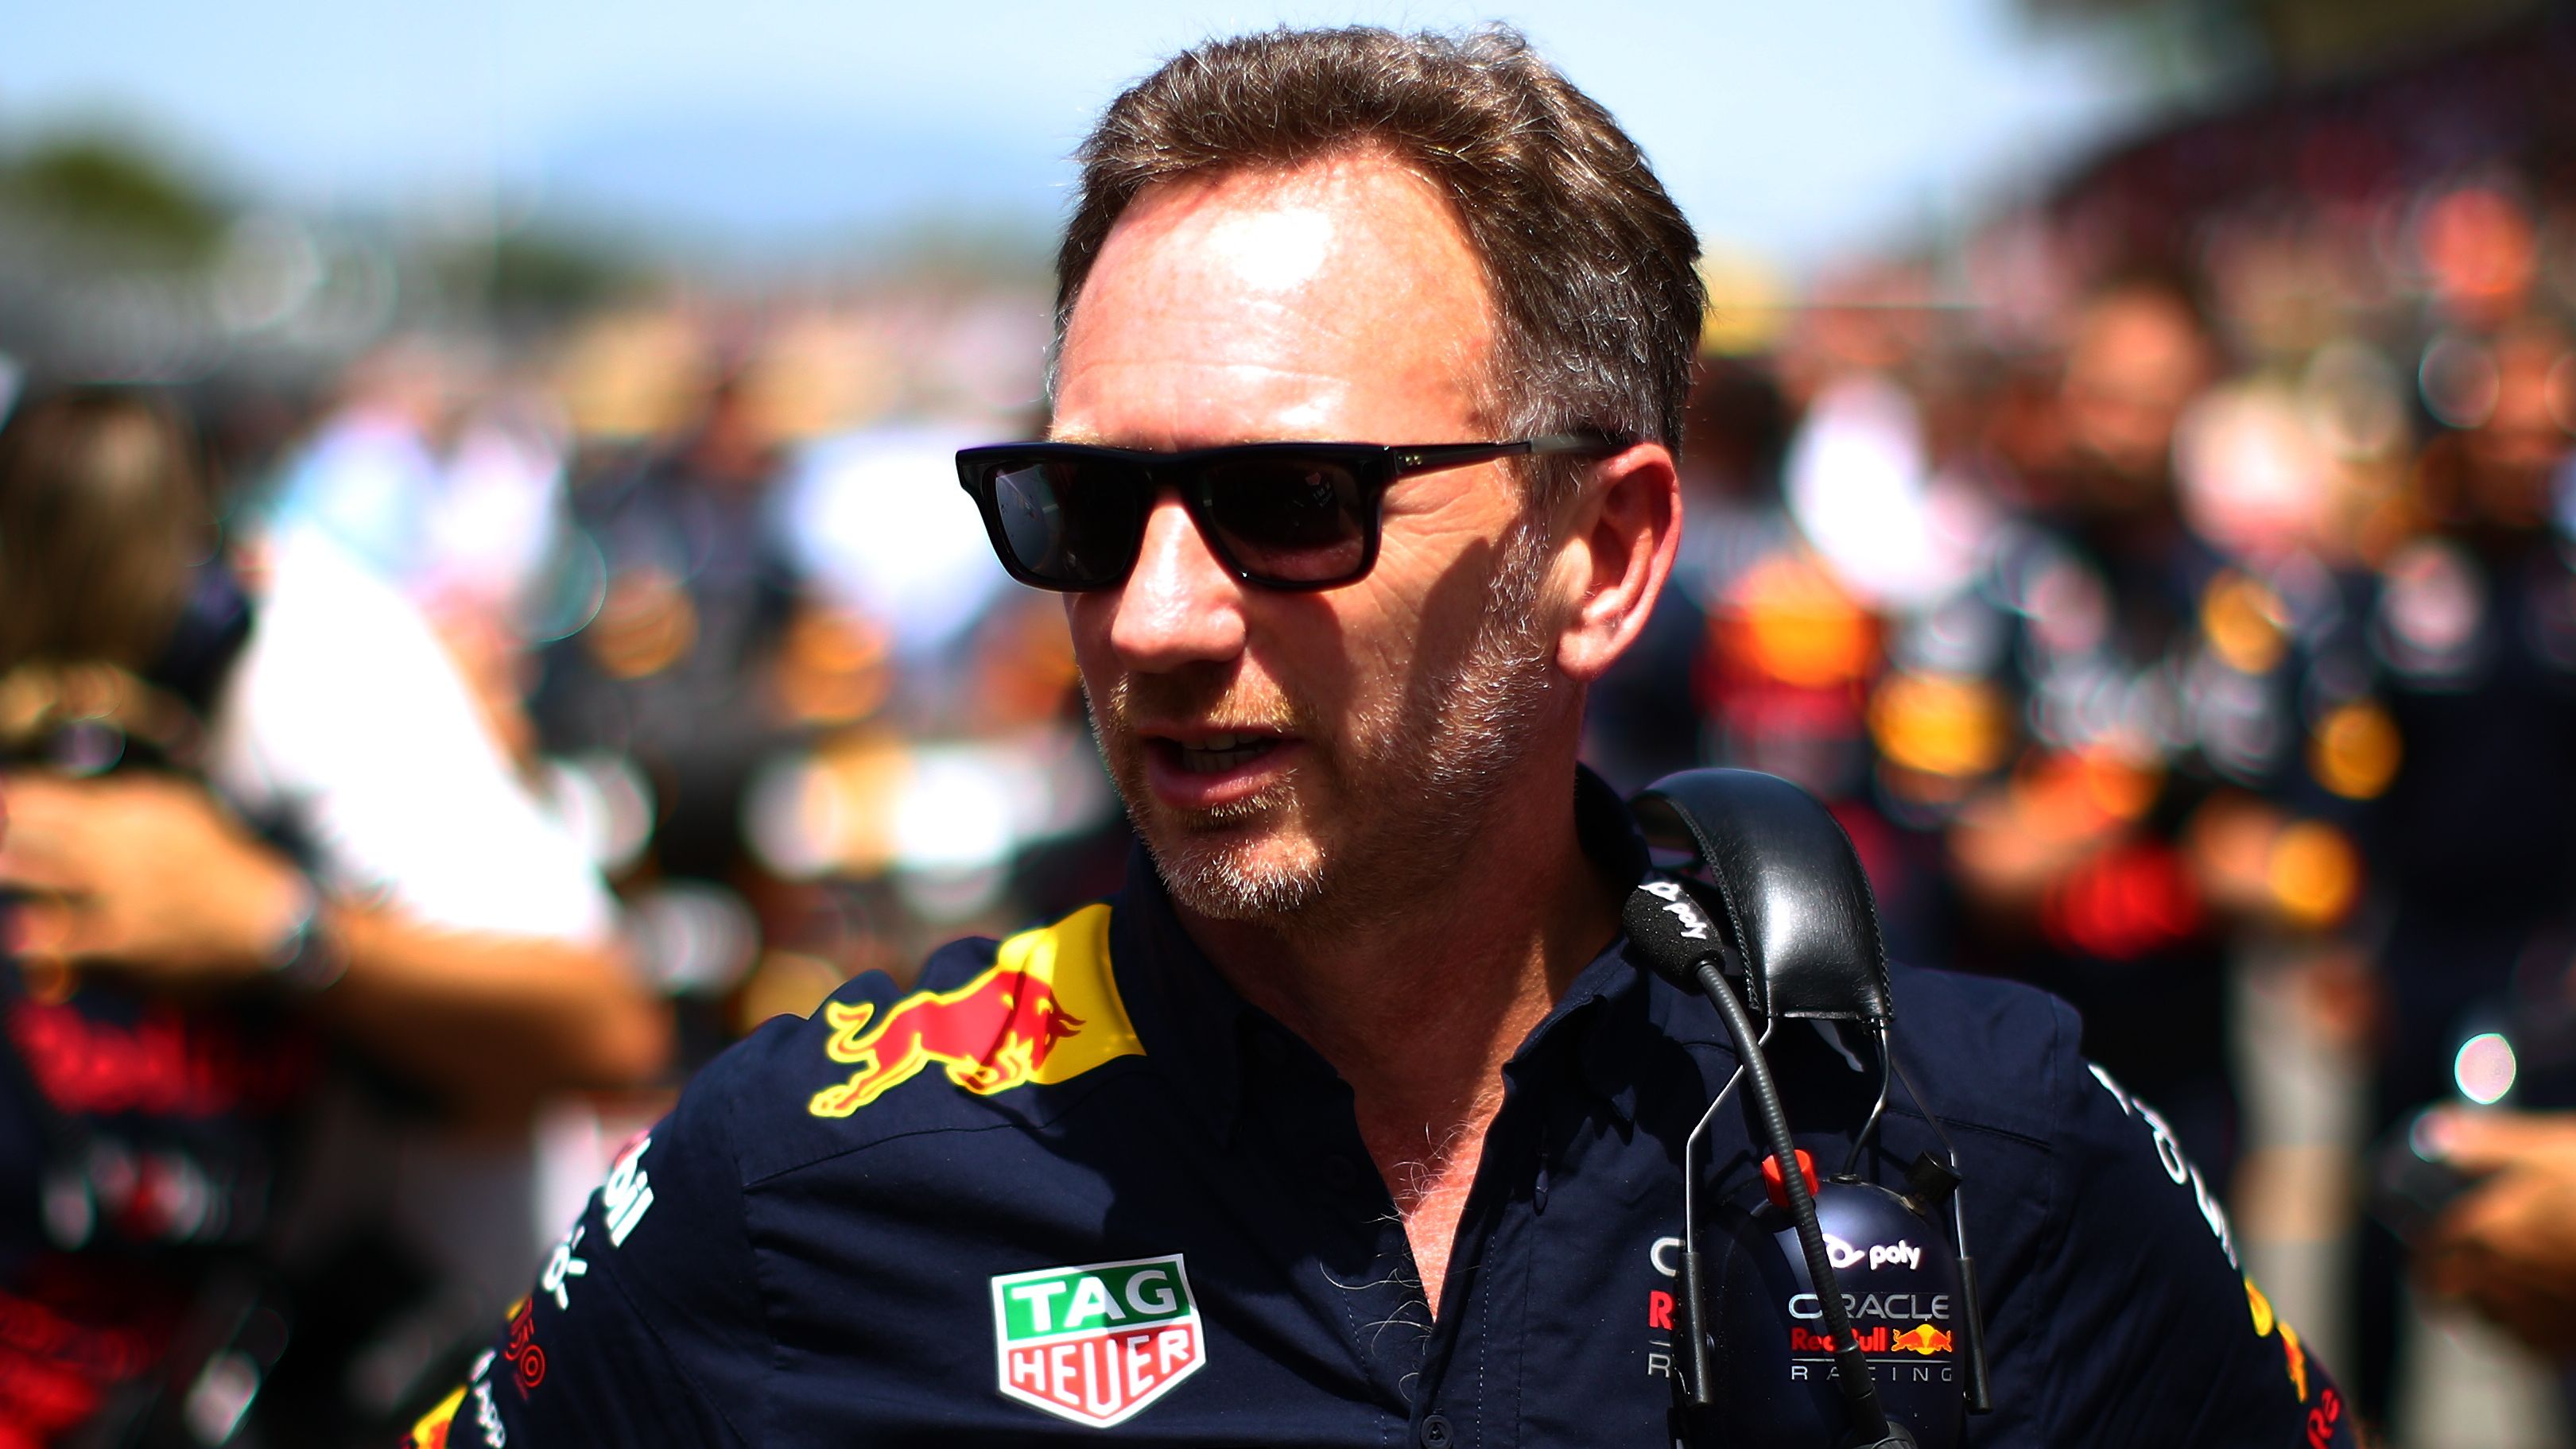 F1 teams will be forced to skip races unless budget cap is raised, says Christian Horner